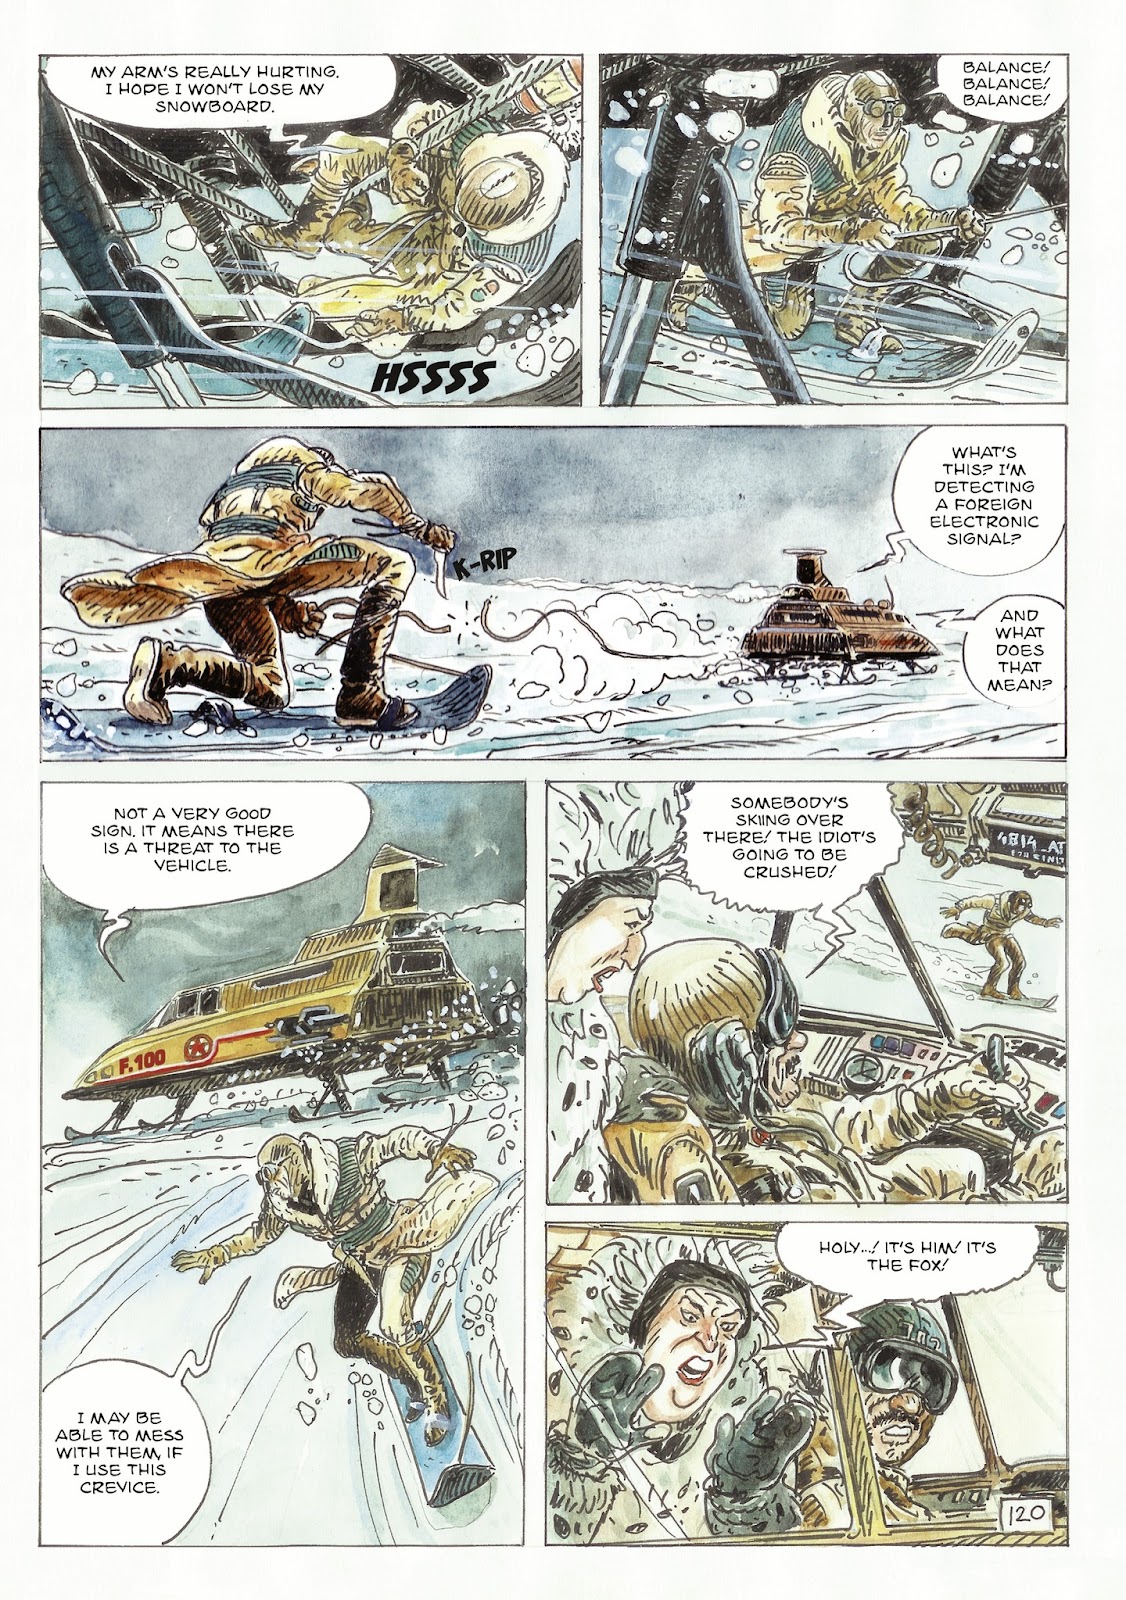 The Man With the Bear issue 2 - Page 66